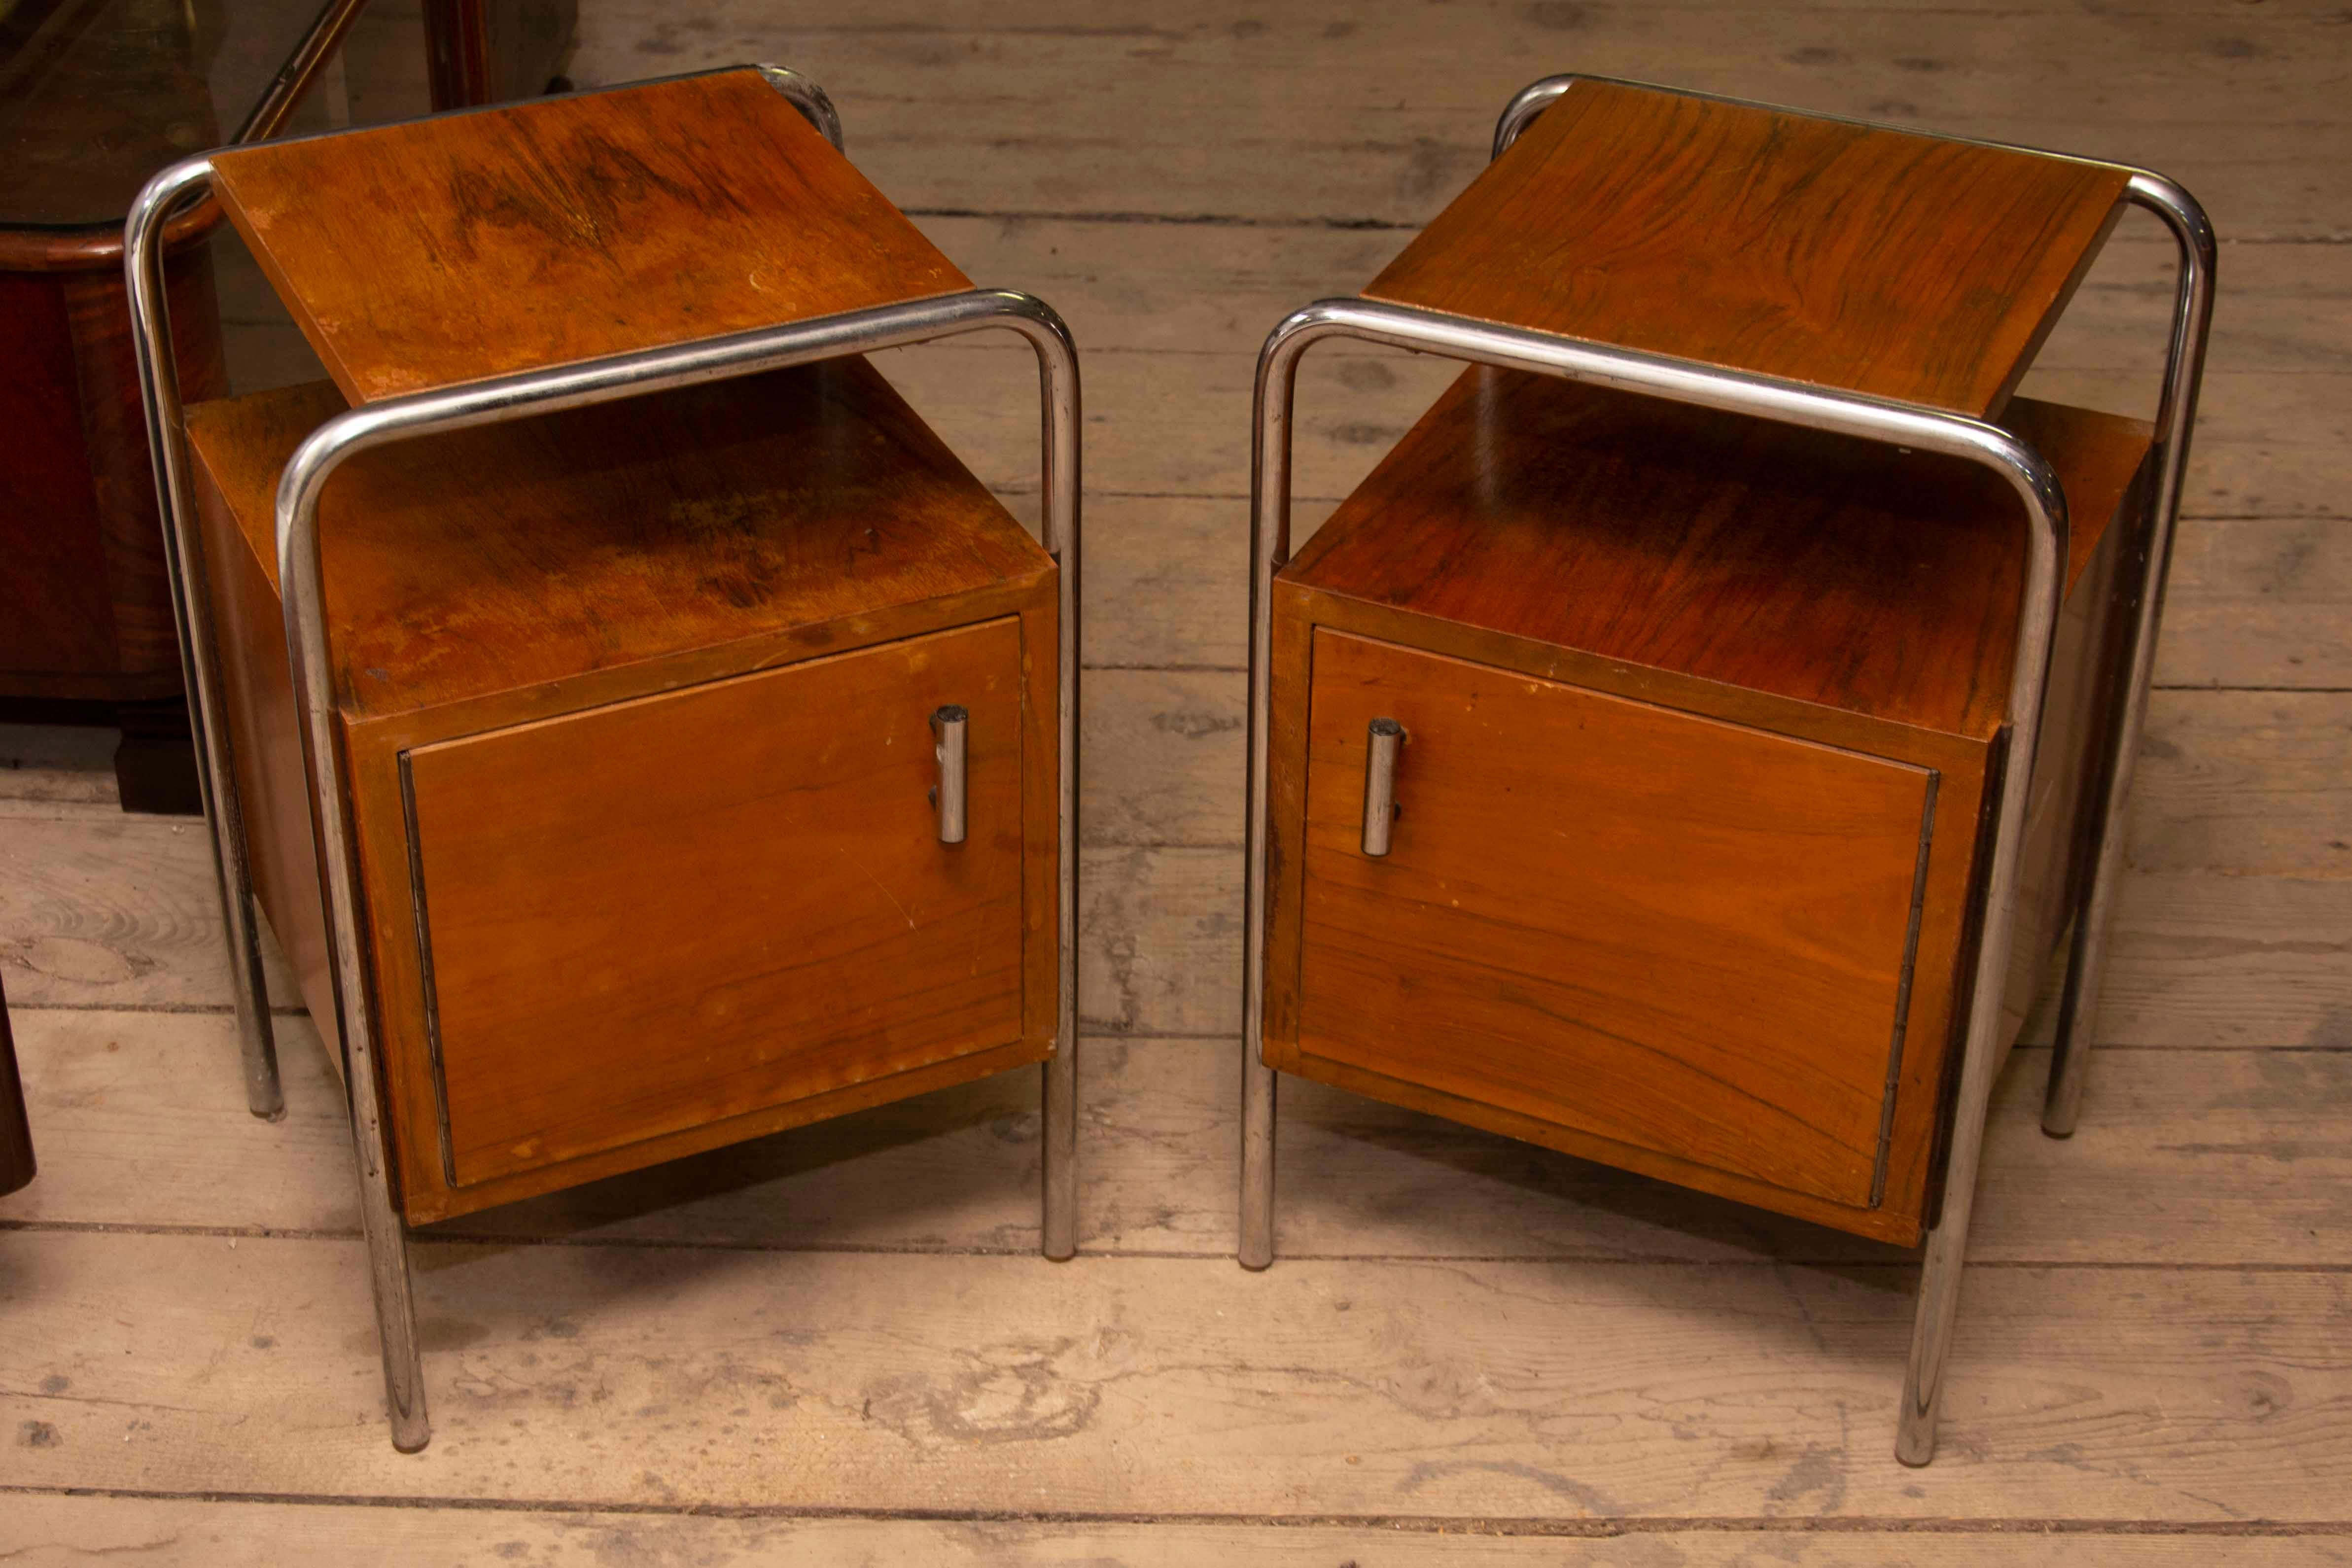 A pair of Minimalist nightstands in the Bauhaus style. Outstanding timeless design. Made in the former Czechoslovakia in the 1950s. It was produced by Kovona company. A typical example of the Bauhaus period in Central Europe. Chrome is in very good